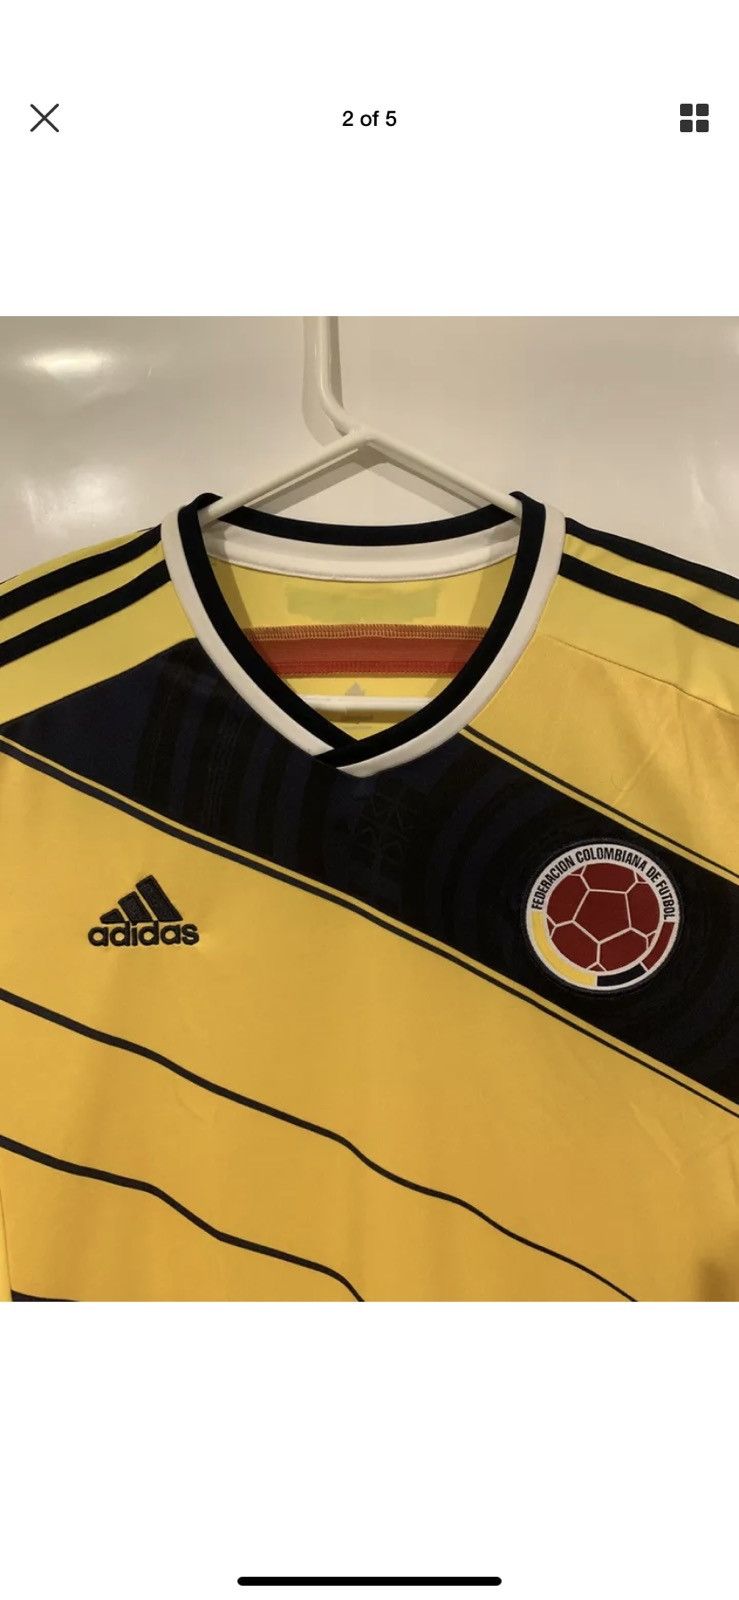 Adidas Adidas Columbia soccer jersey yellow rare authentic Size US M / EU 48-50 / 2 - 2 Preview